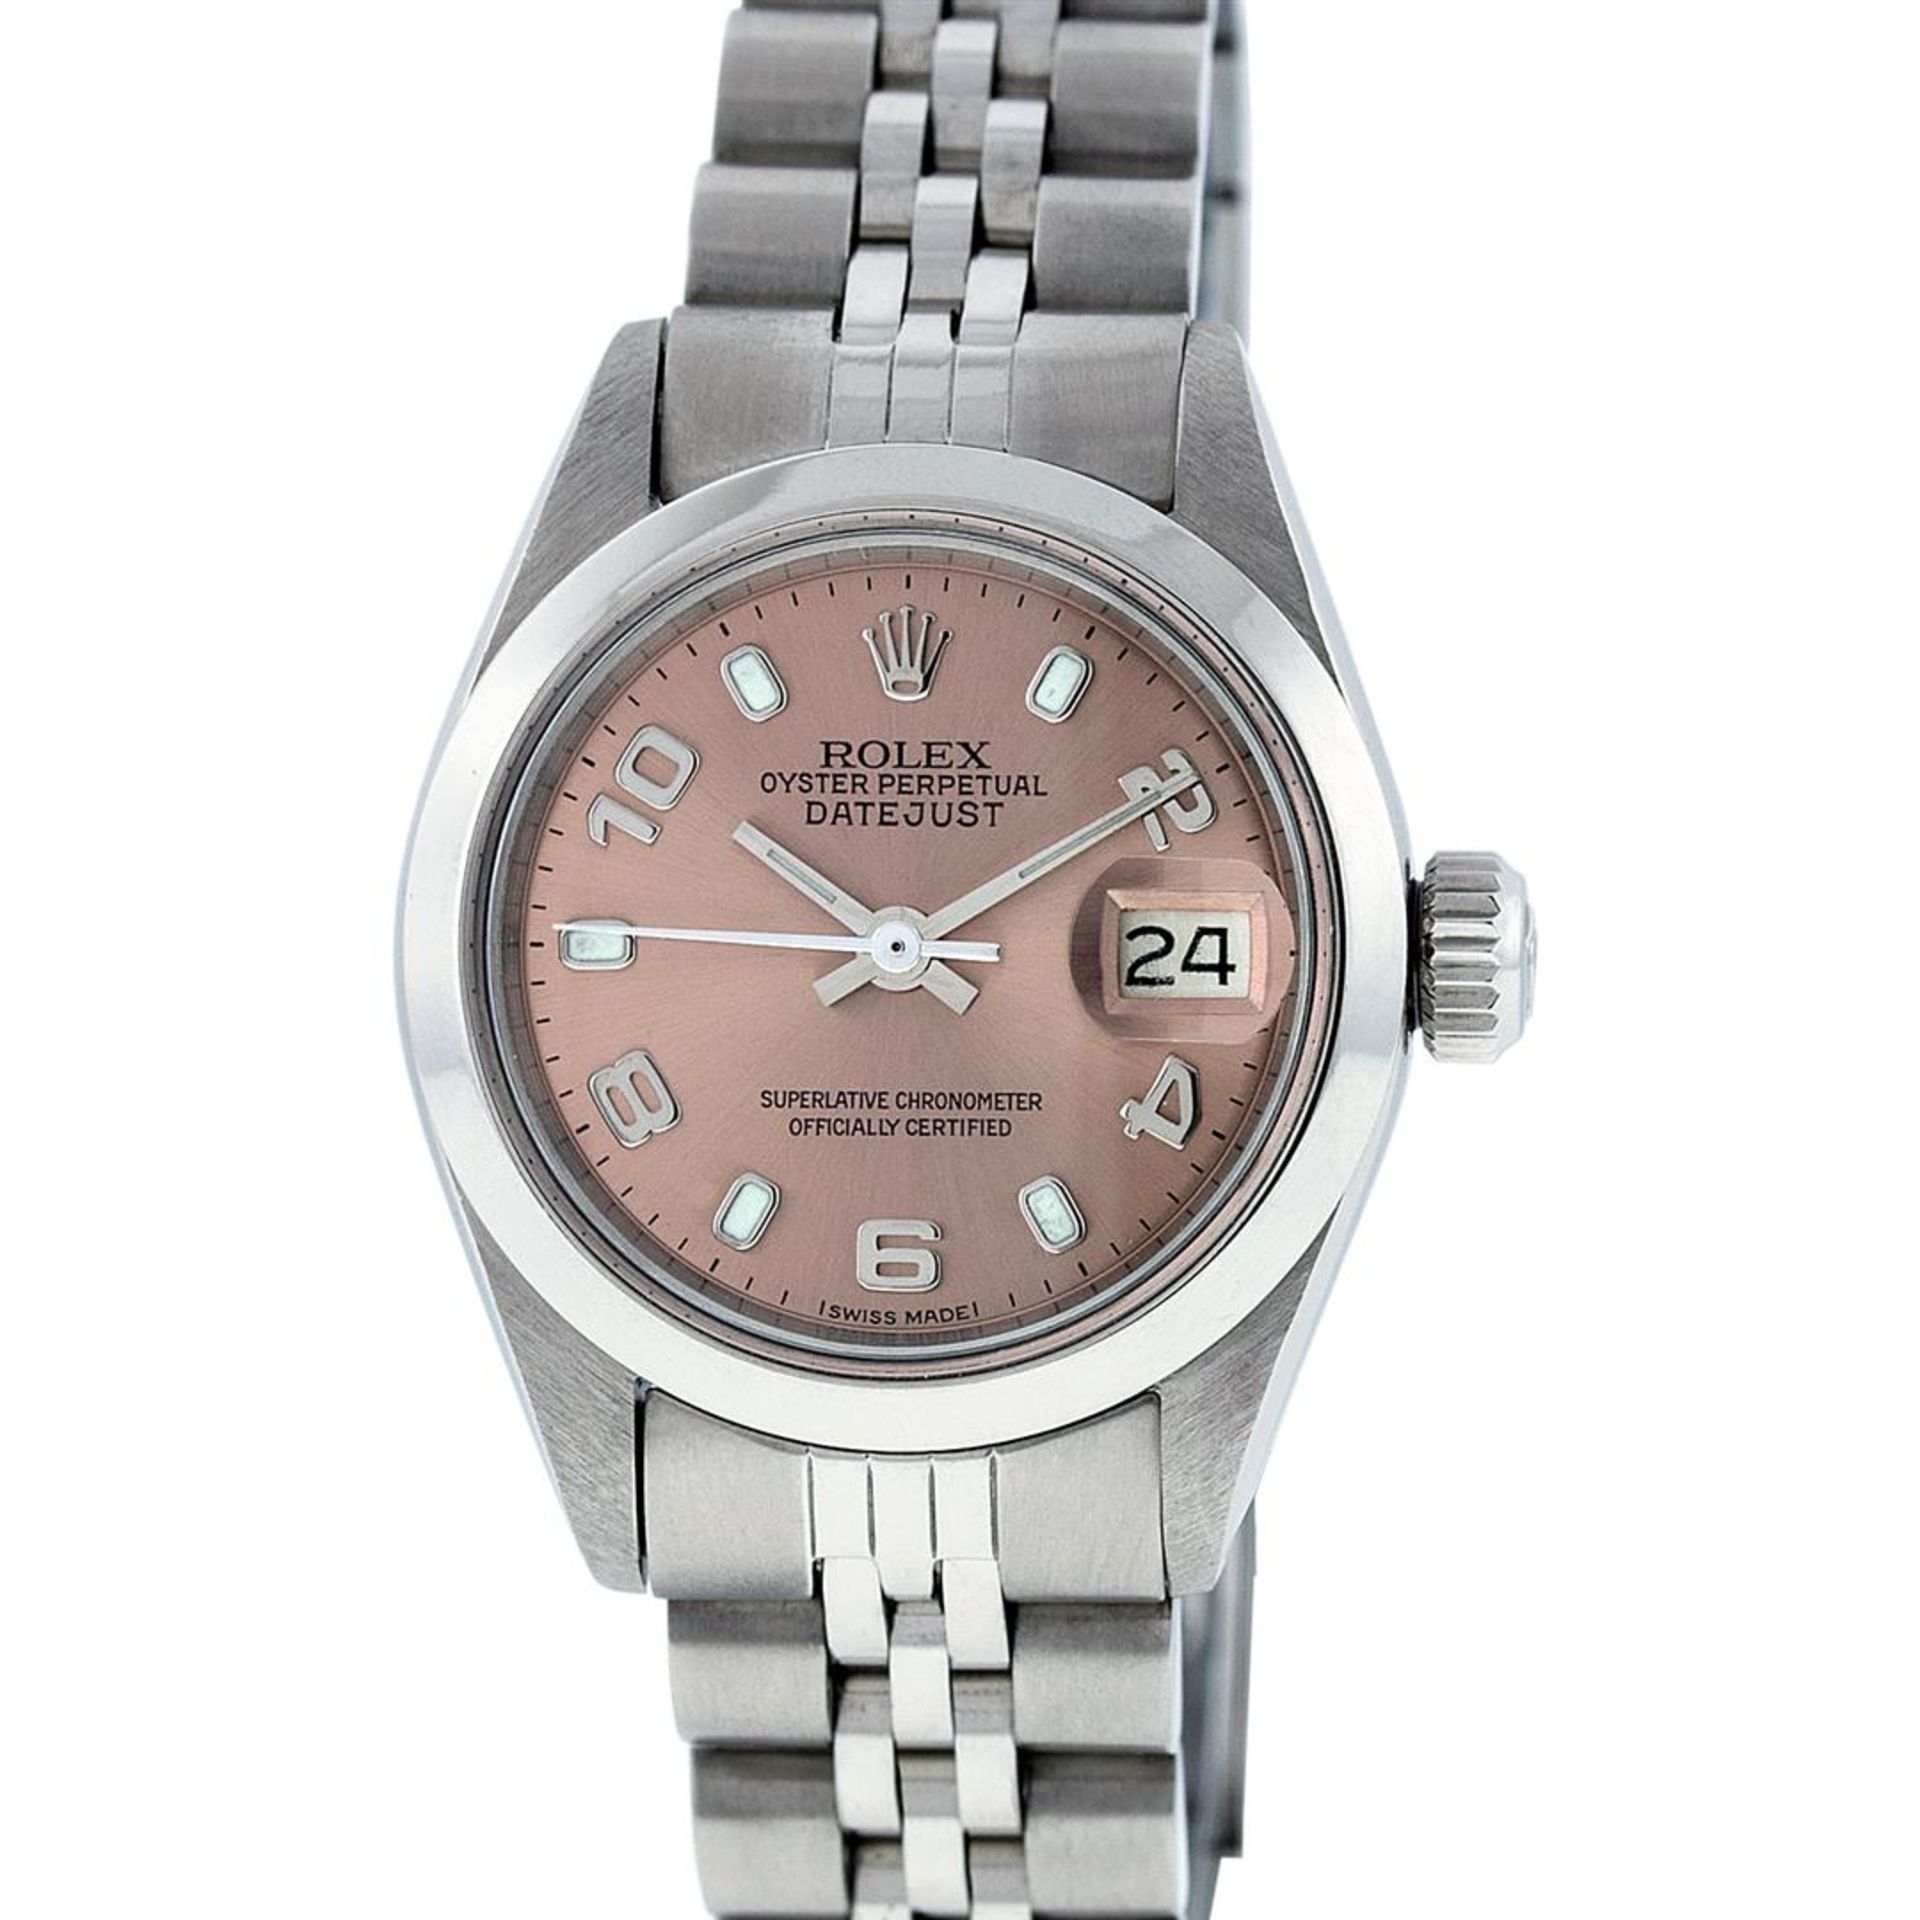 Rolex Ladies Stainless Steel Salmon Dial 26MM Datejust Wristwatch Oyster Perpetu - Image 2 of 9